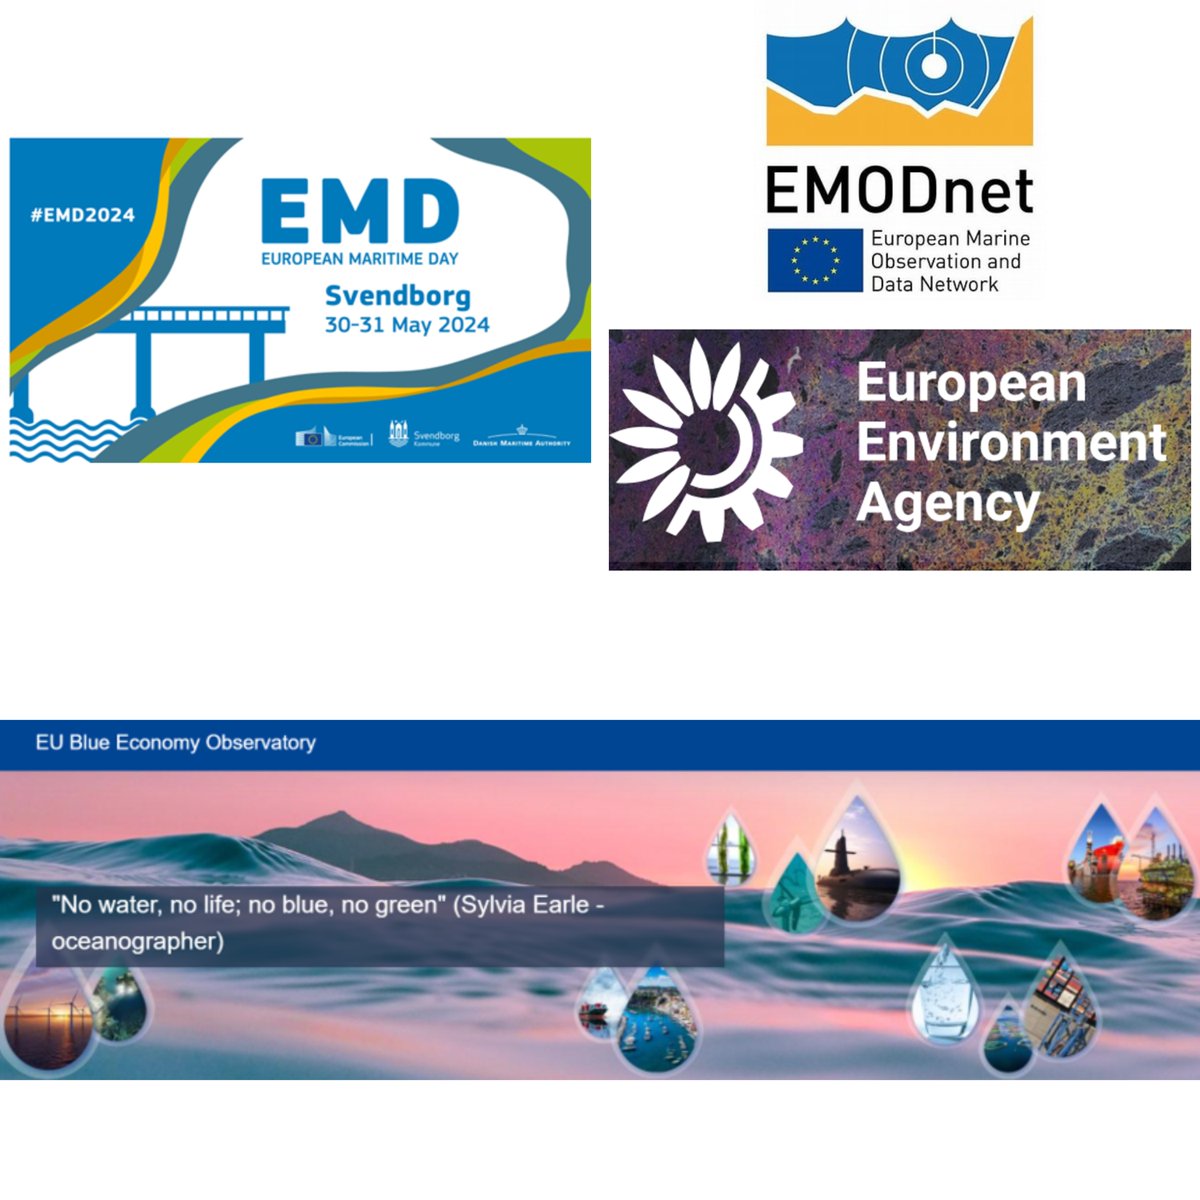 How do #EMODnet, #EUBlueEconomyObservatory & #EEA support EU Policy & the #BlueEconomy? Join our #EMD2024 workshop B-4, 31 May at 11:15-12:30 to find out more! Register by 15th May! b2match.com/e/european-mar… #EUGreenDeal #EUMissionOcean